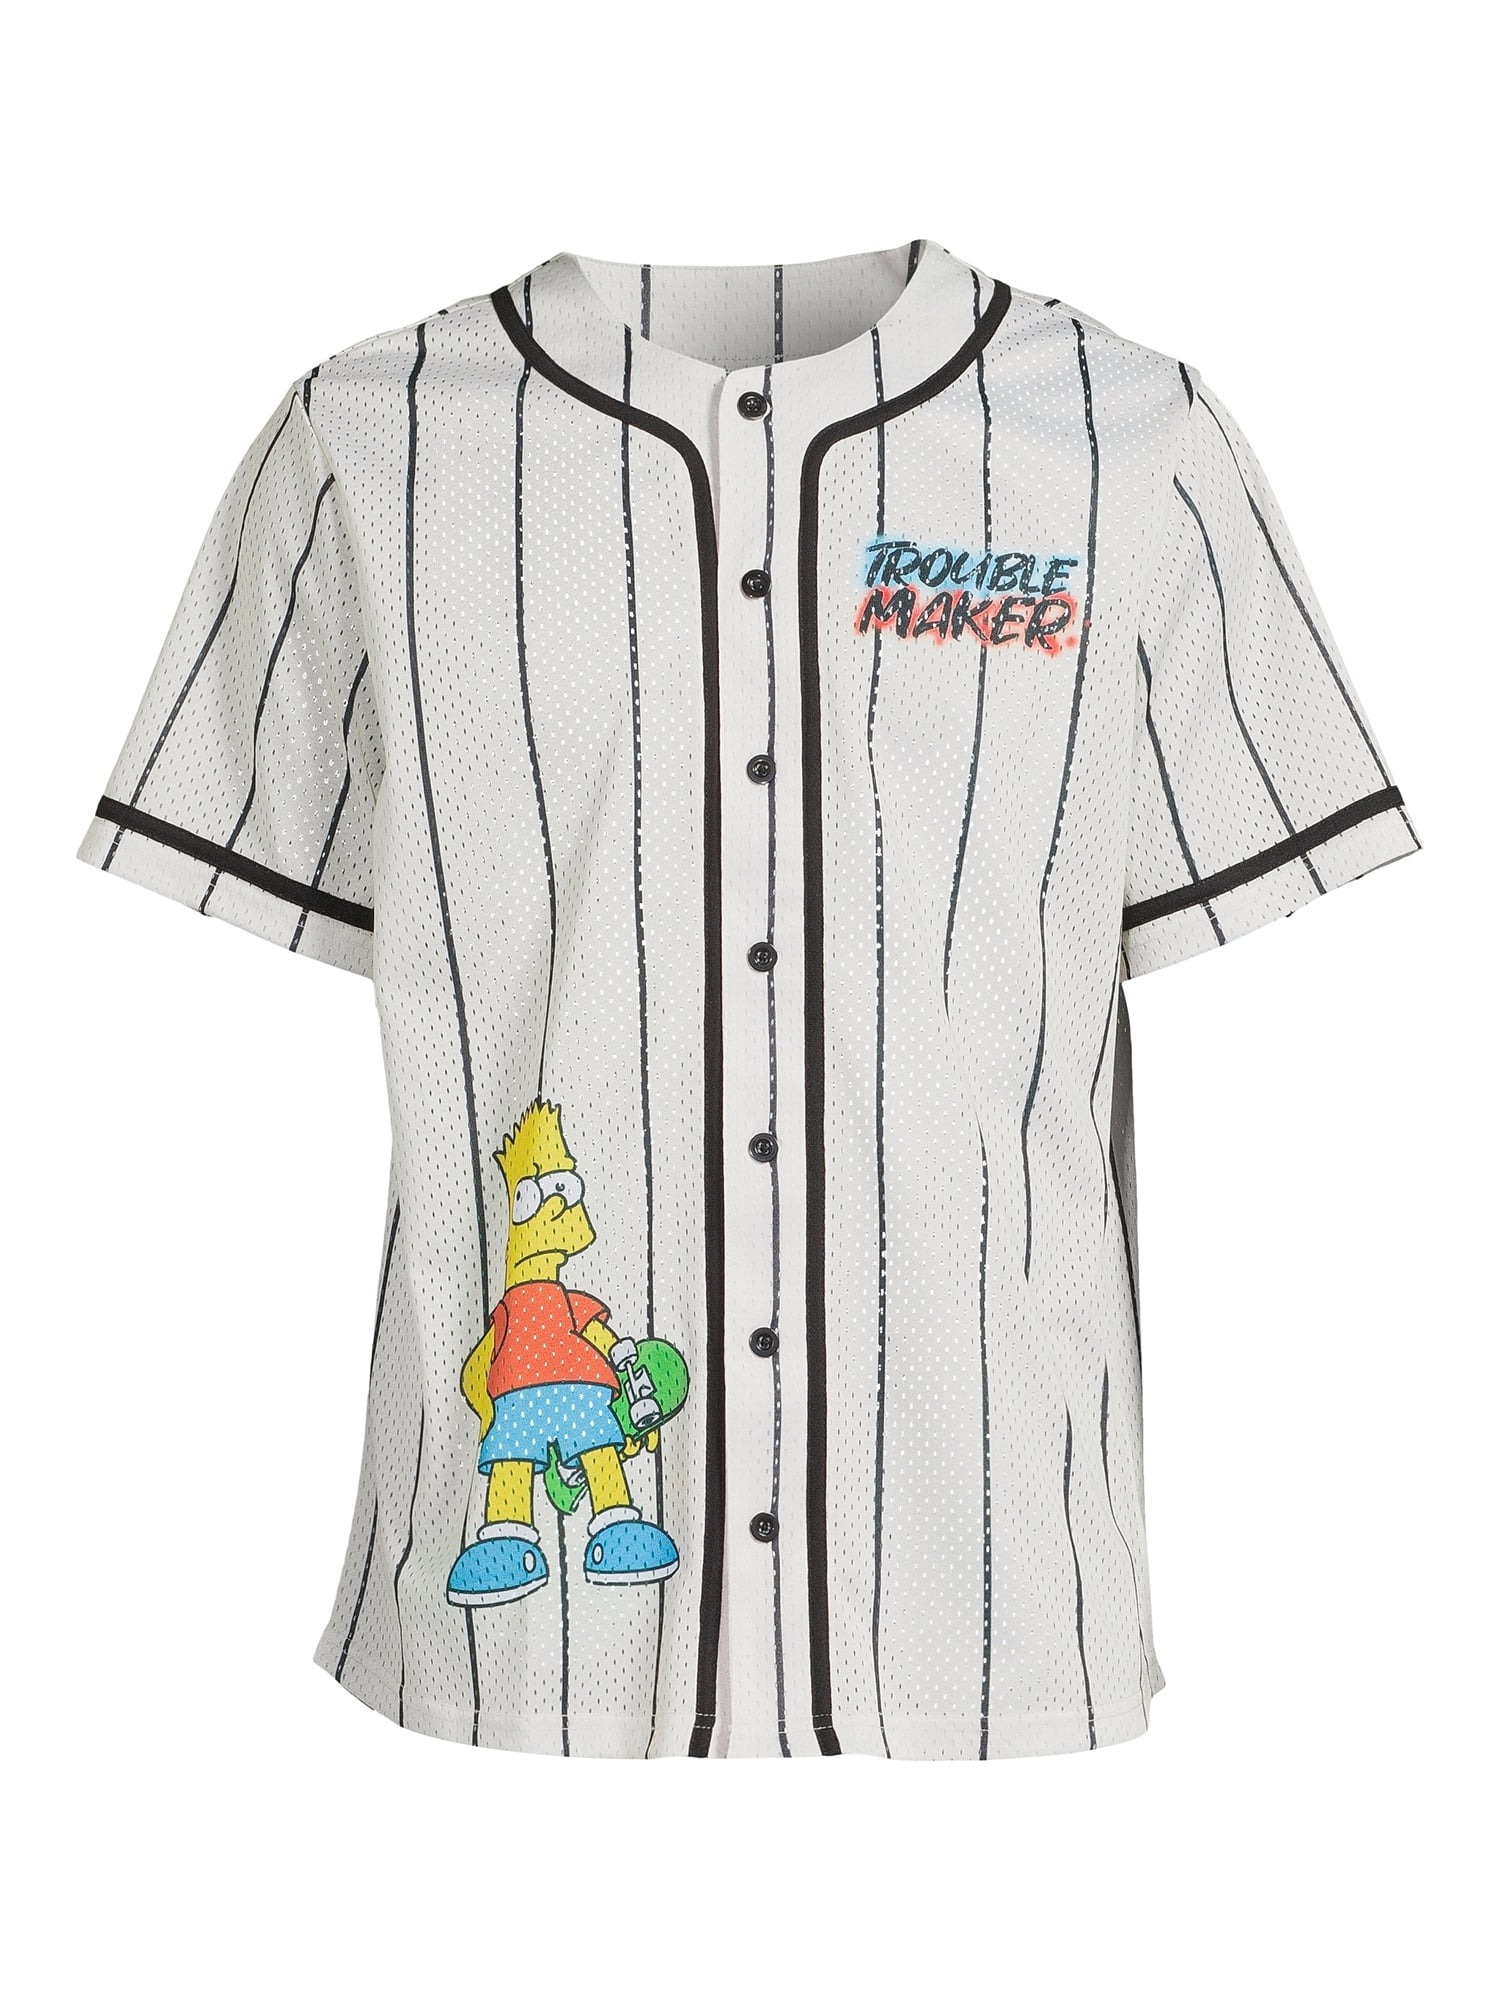 The Simpsons Men's Graphic Baseball Jersey, Sizes S-xl, Size: Small, Beige